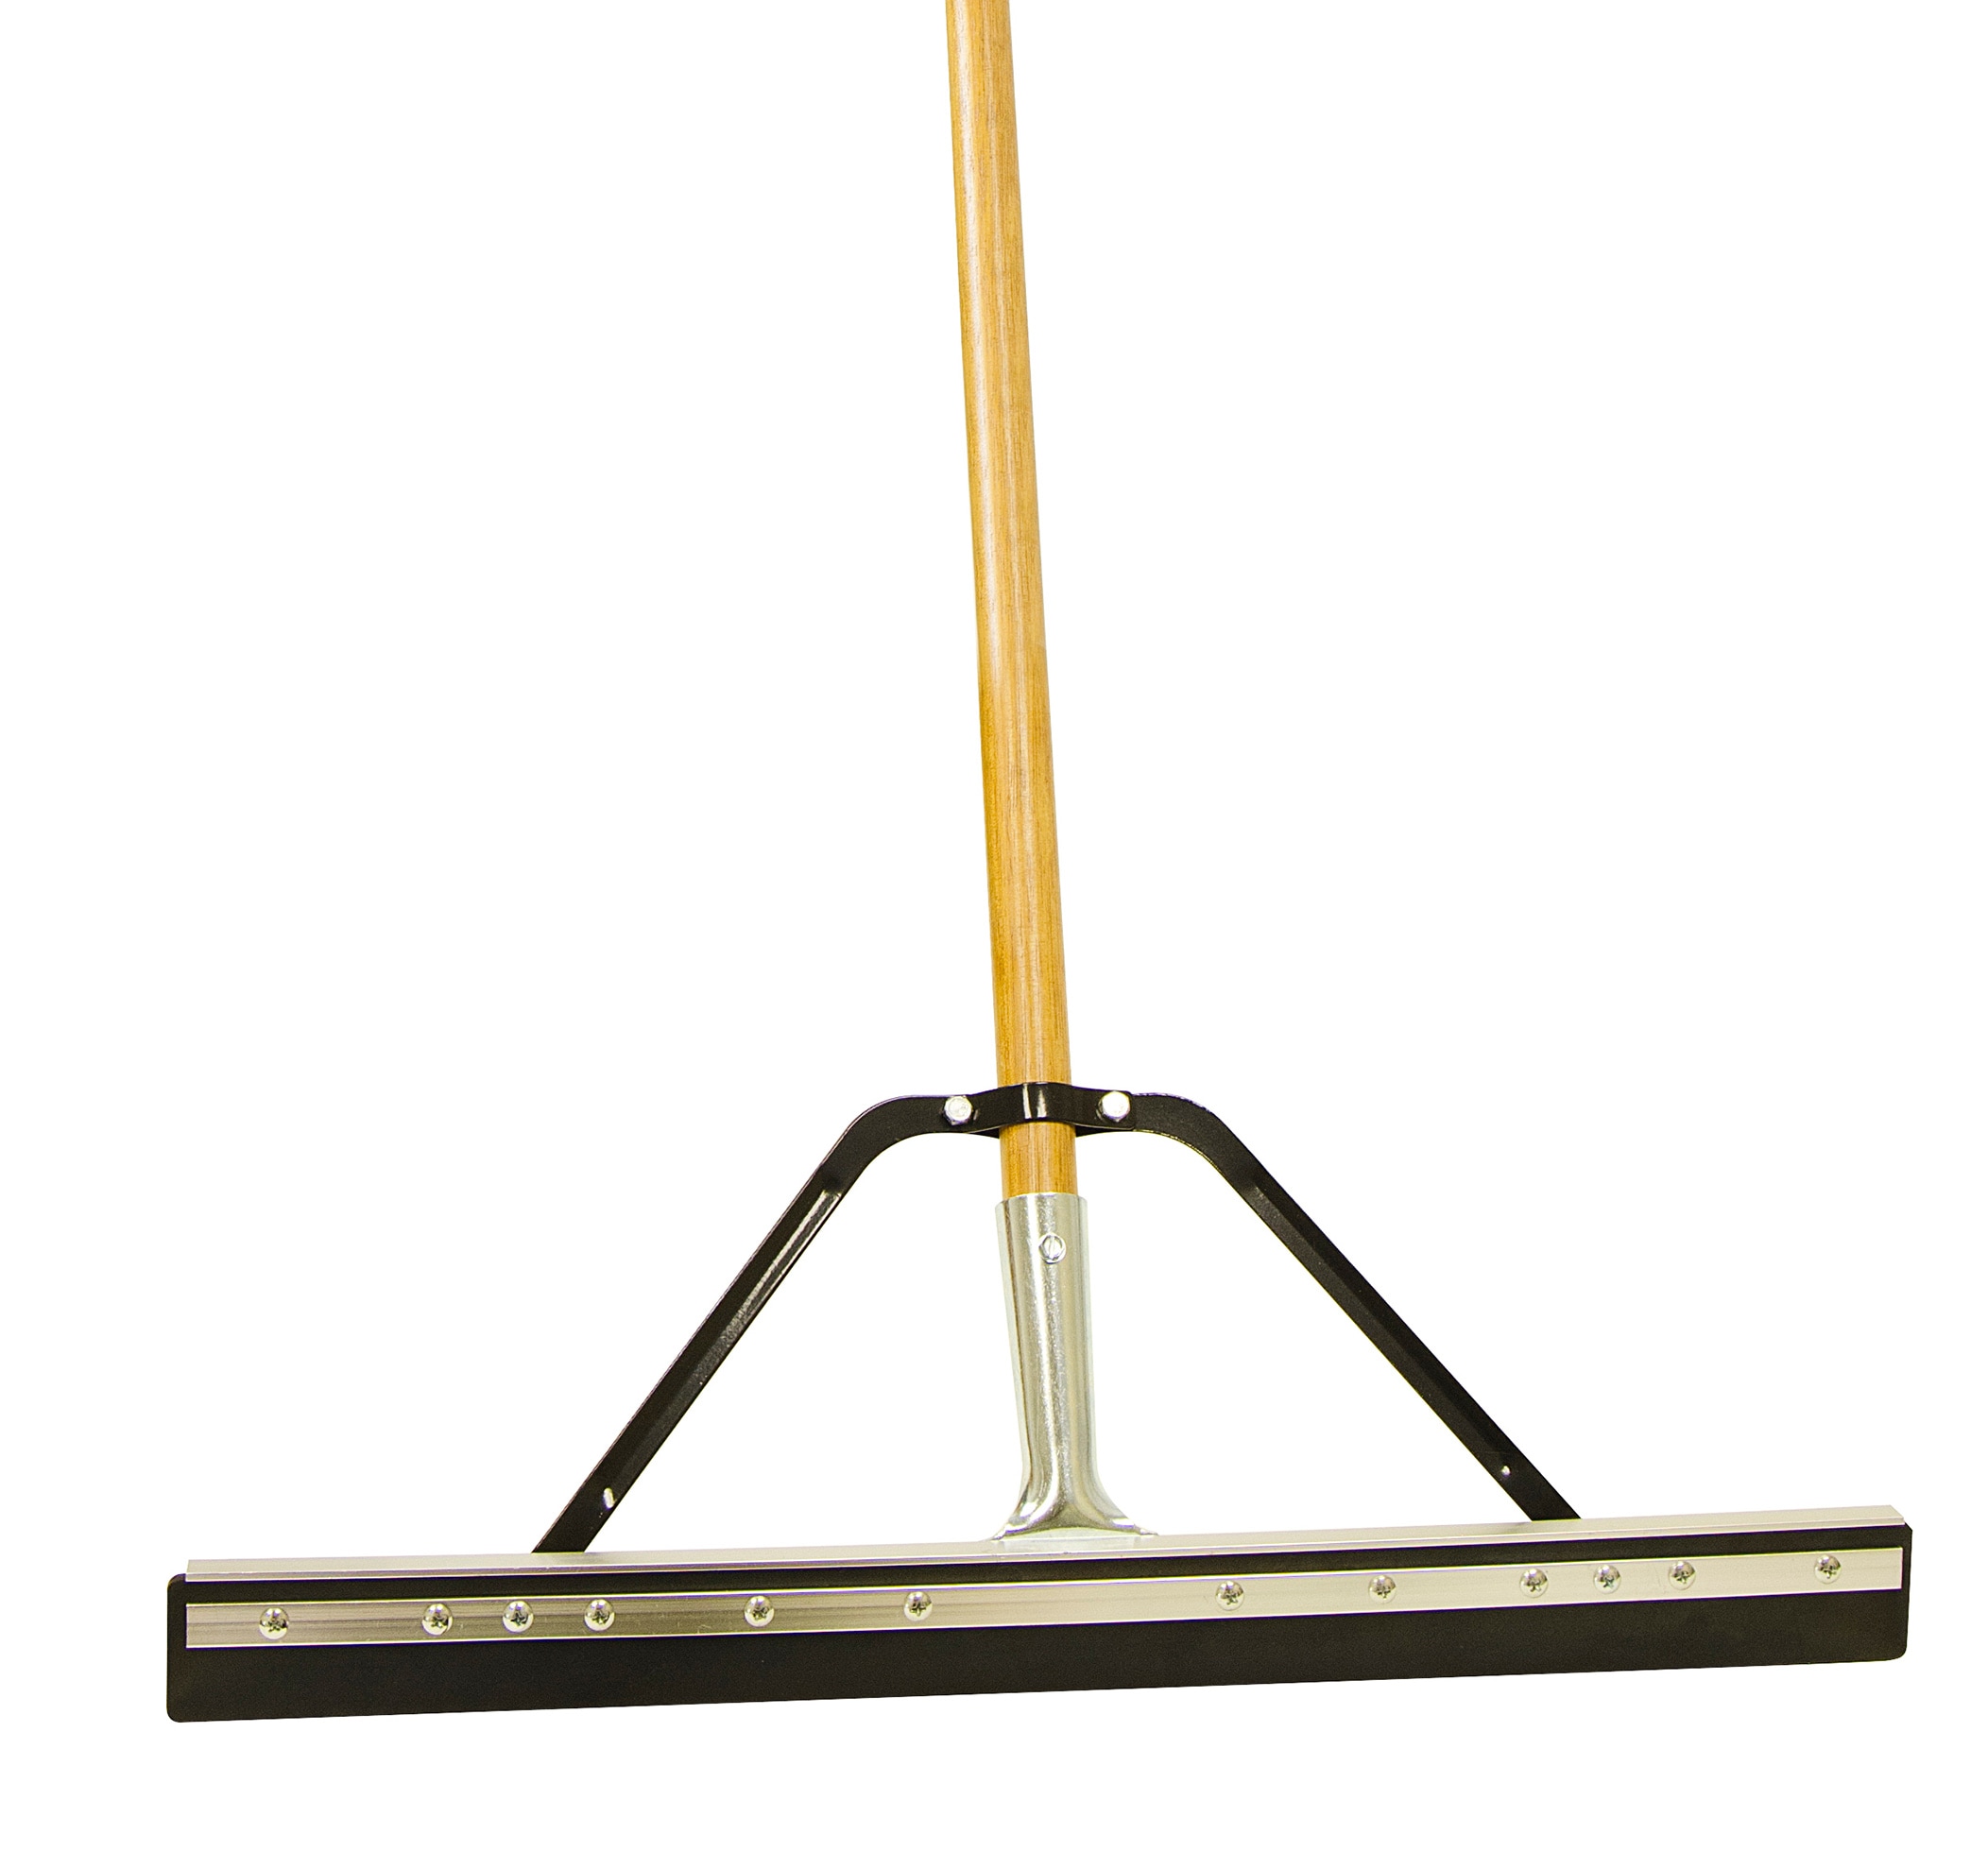 Quickie Professional 24 in. Floor Squeegee with Handle 16JSHDSU - The Home  Depot